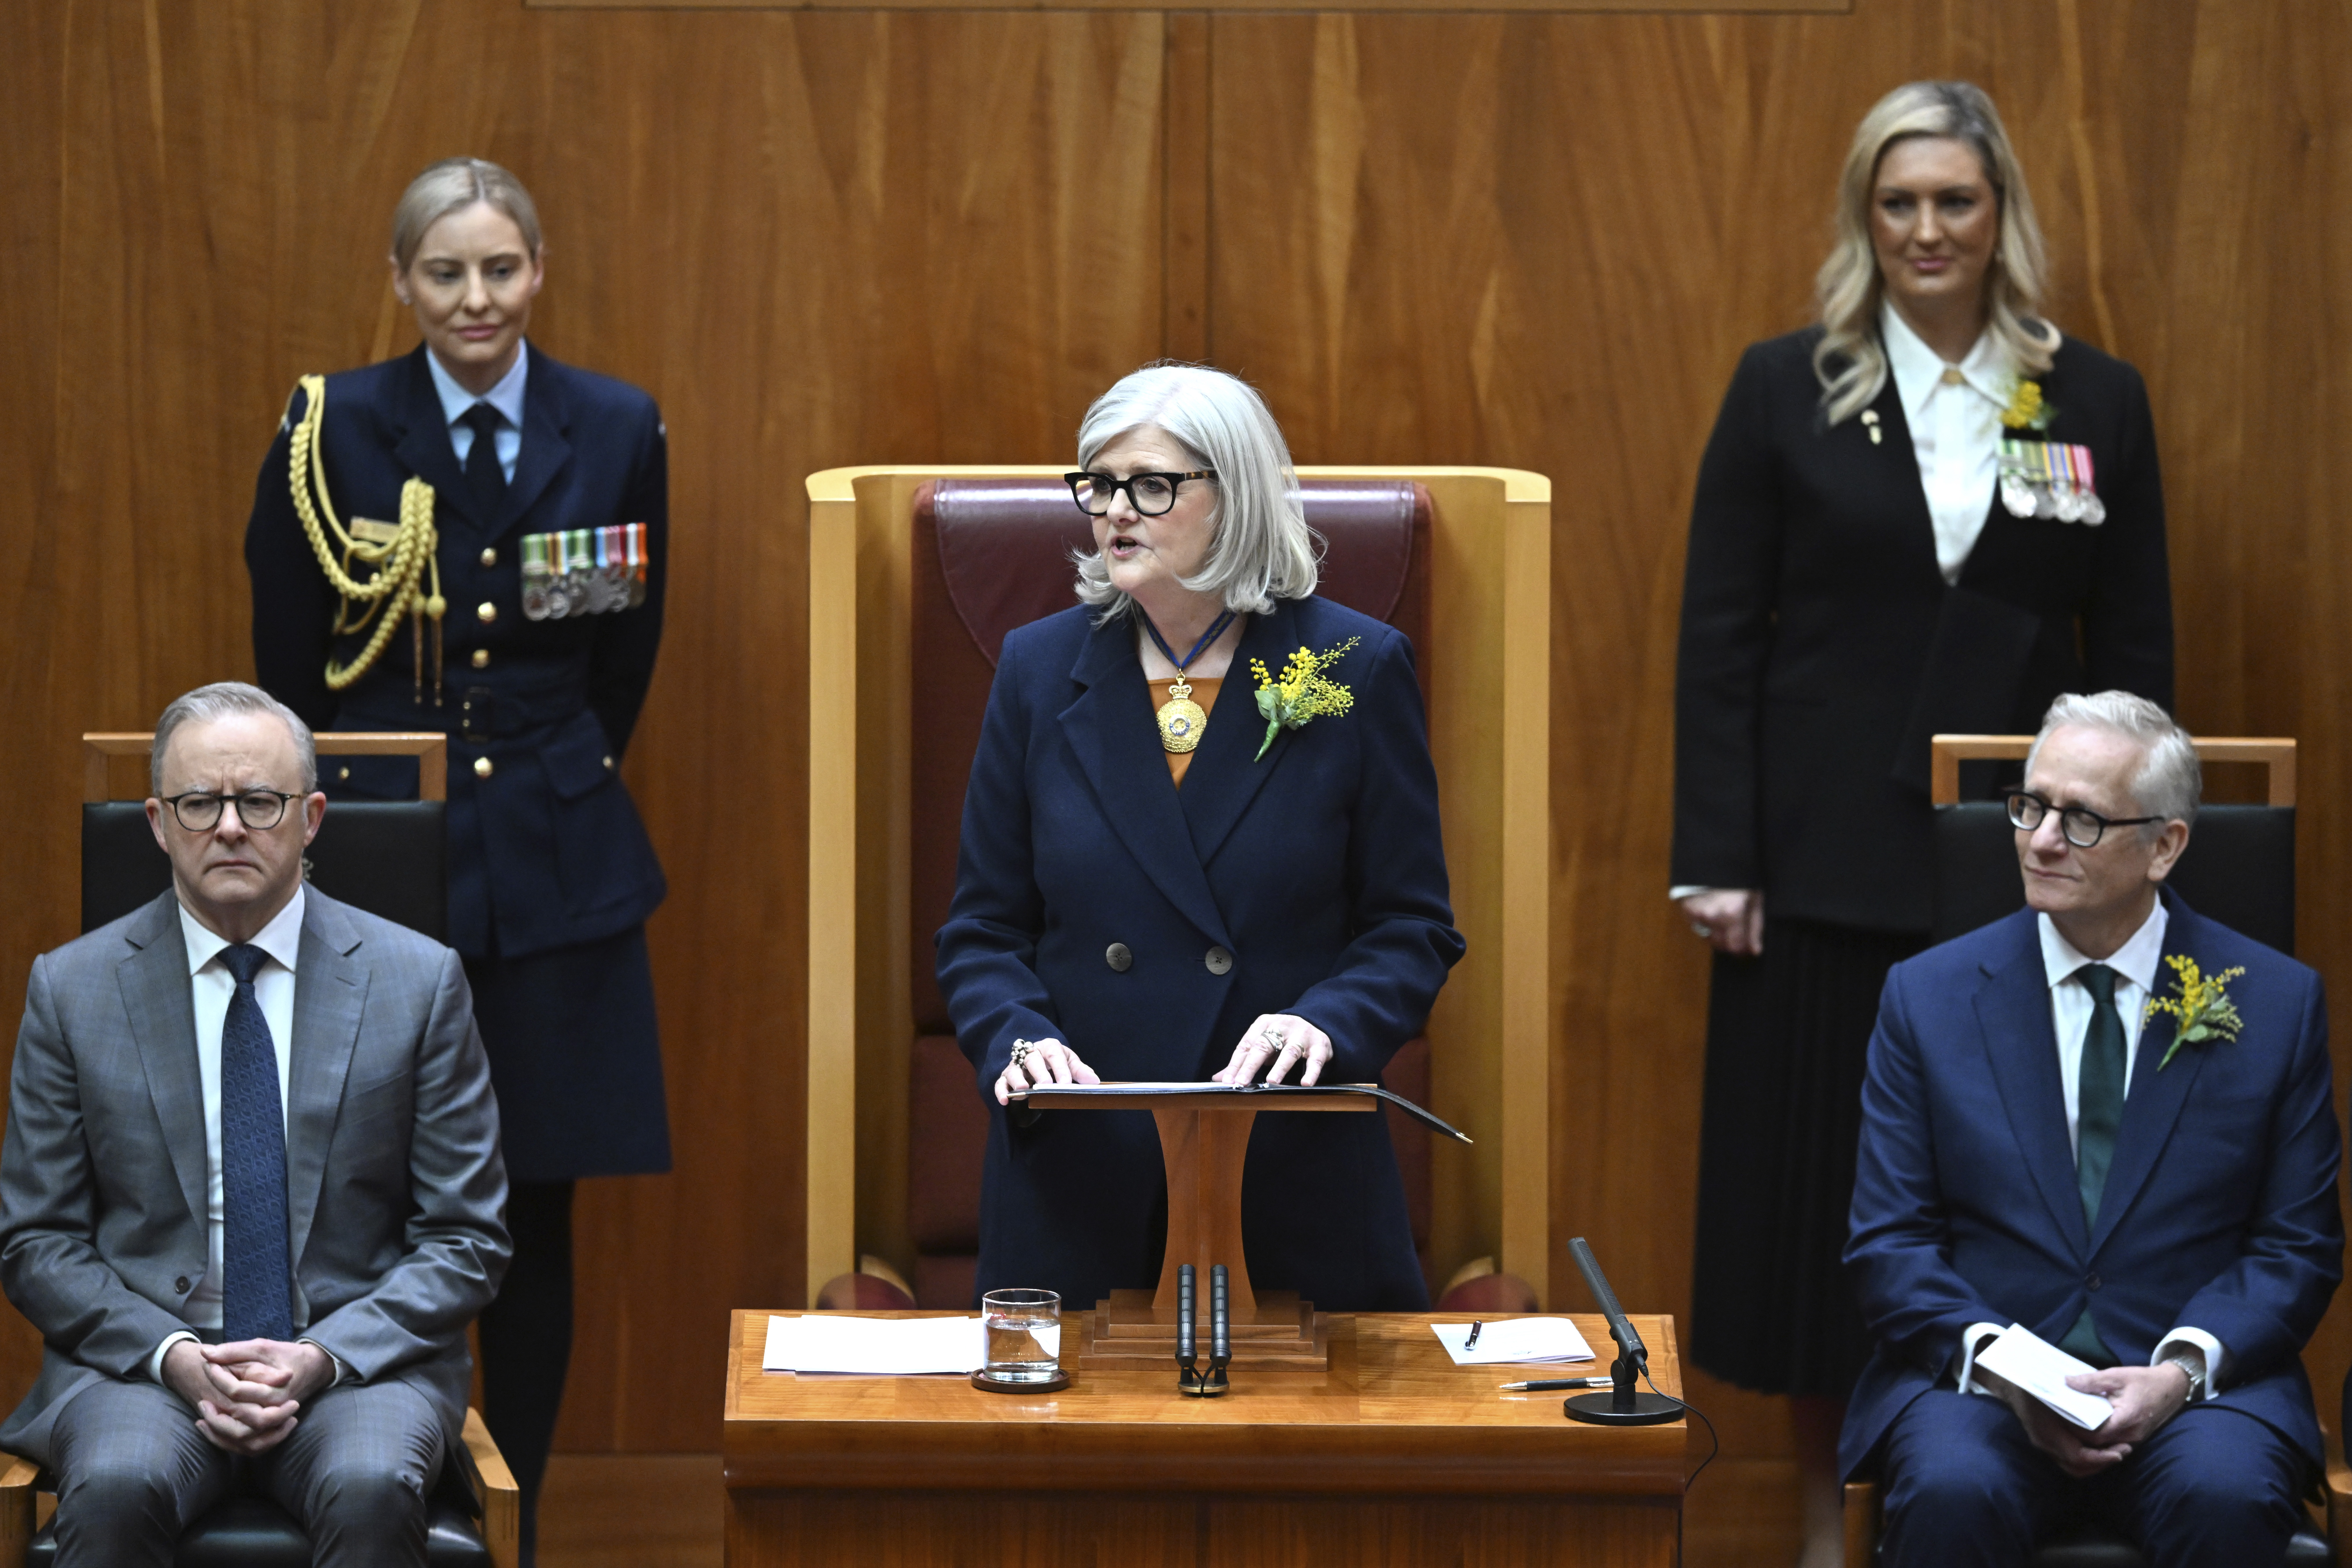 Governor-General of Australia Sam Mostyn, center, speaks during the swearing in ceremony in the Senate chamber at Parliament House in Canberra, Monday, July 1, 2024, as Prime Minister Anthony Albanese, left, listens. Mostyn is Australia's second woman governor-general, a largely ceremonial role representing the British monarch as the nation's head of state. (Lukas Coch/AAP Image via AP)